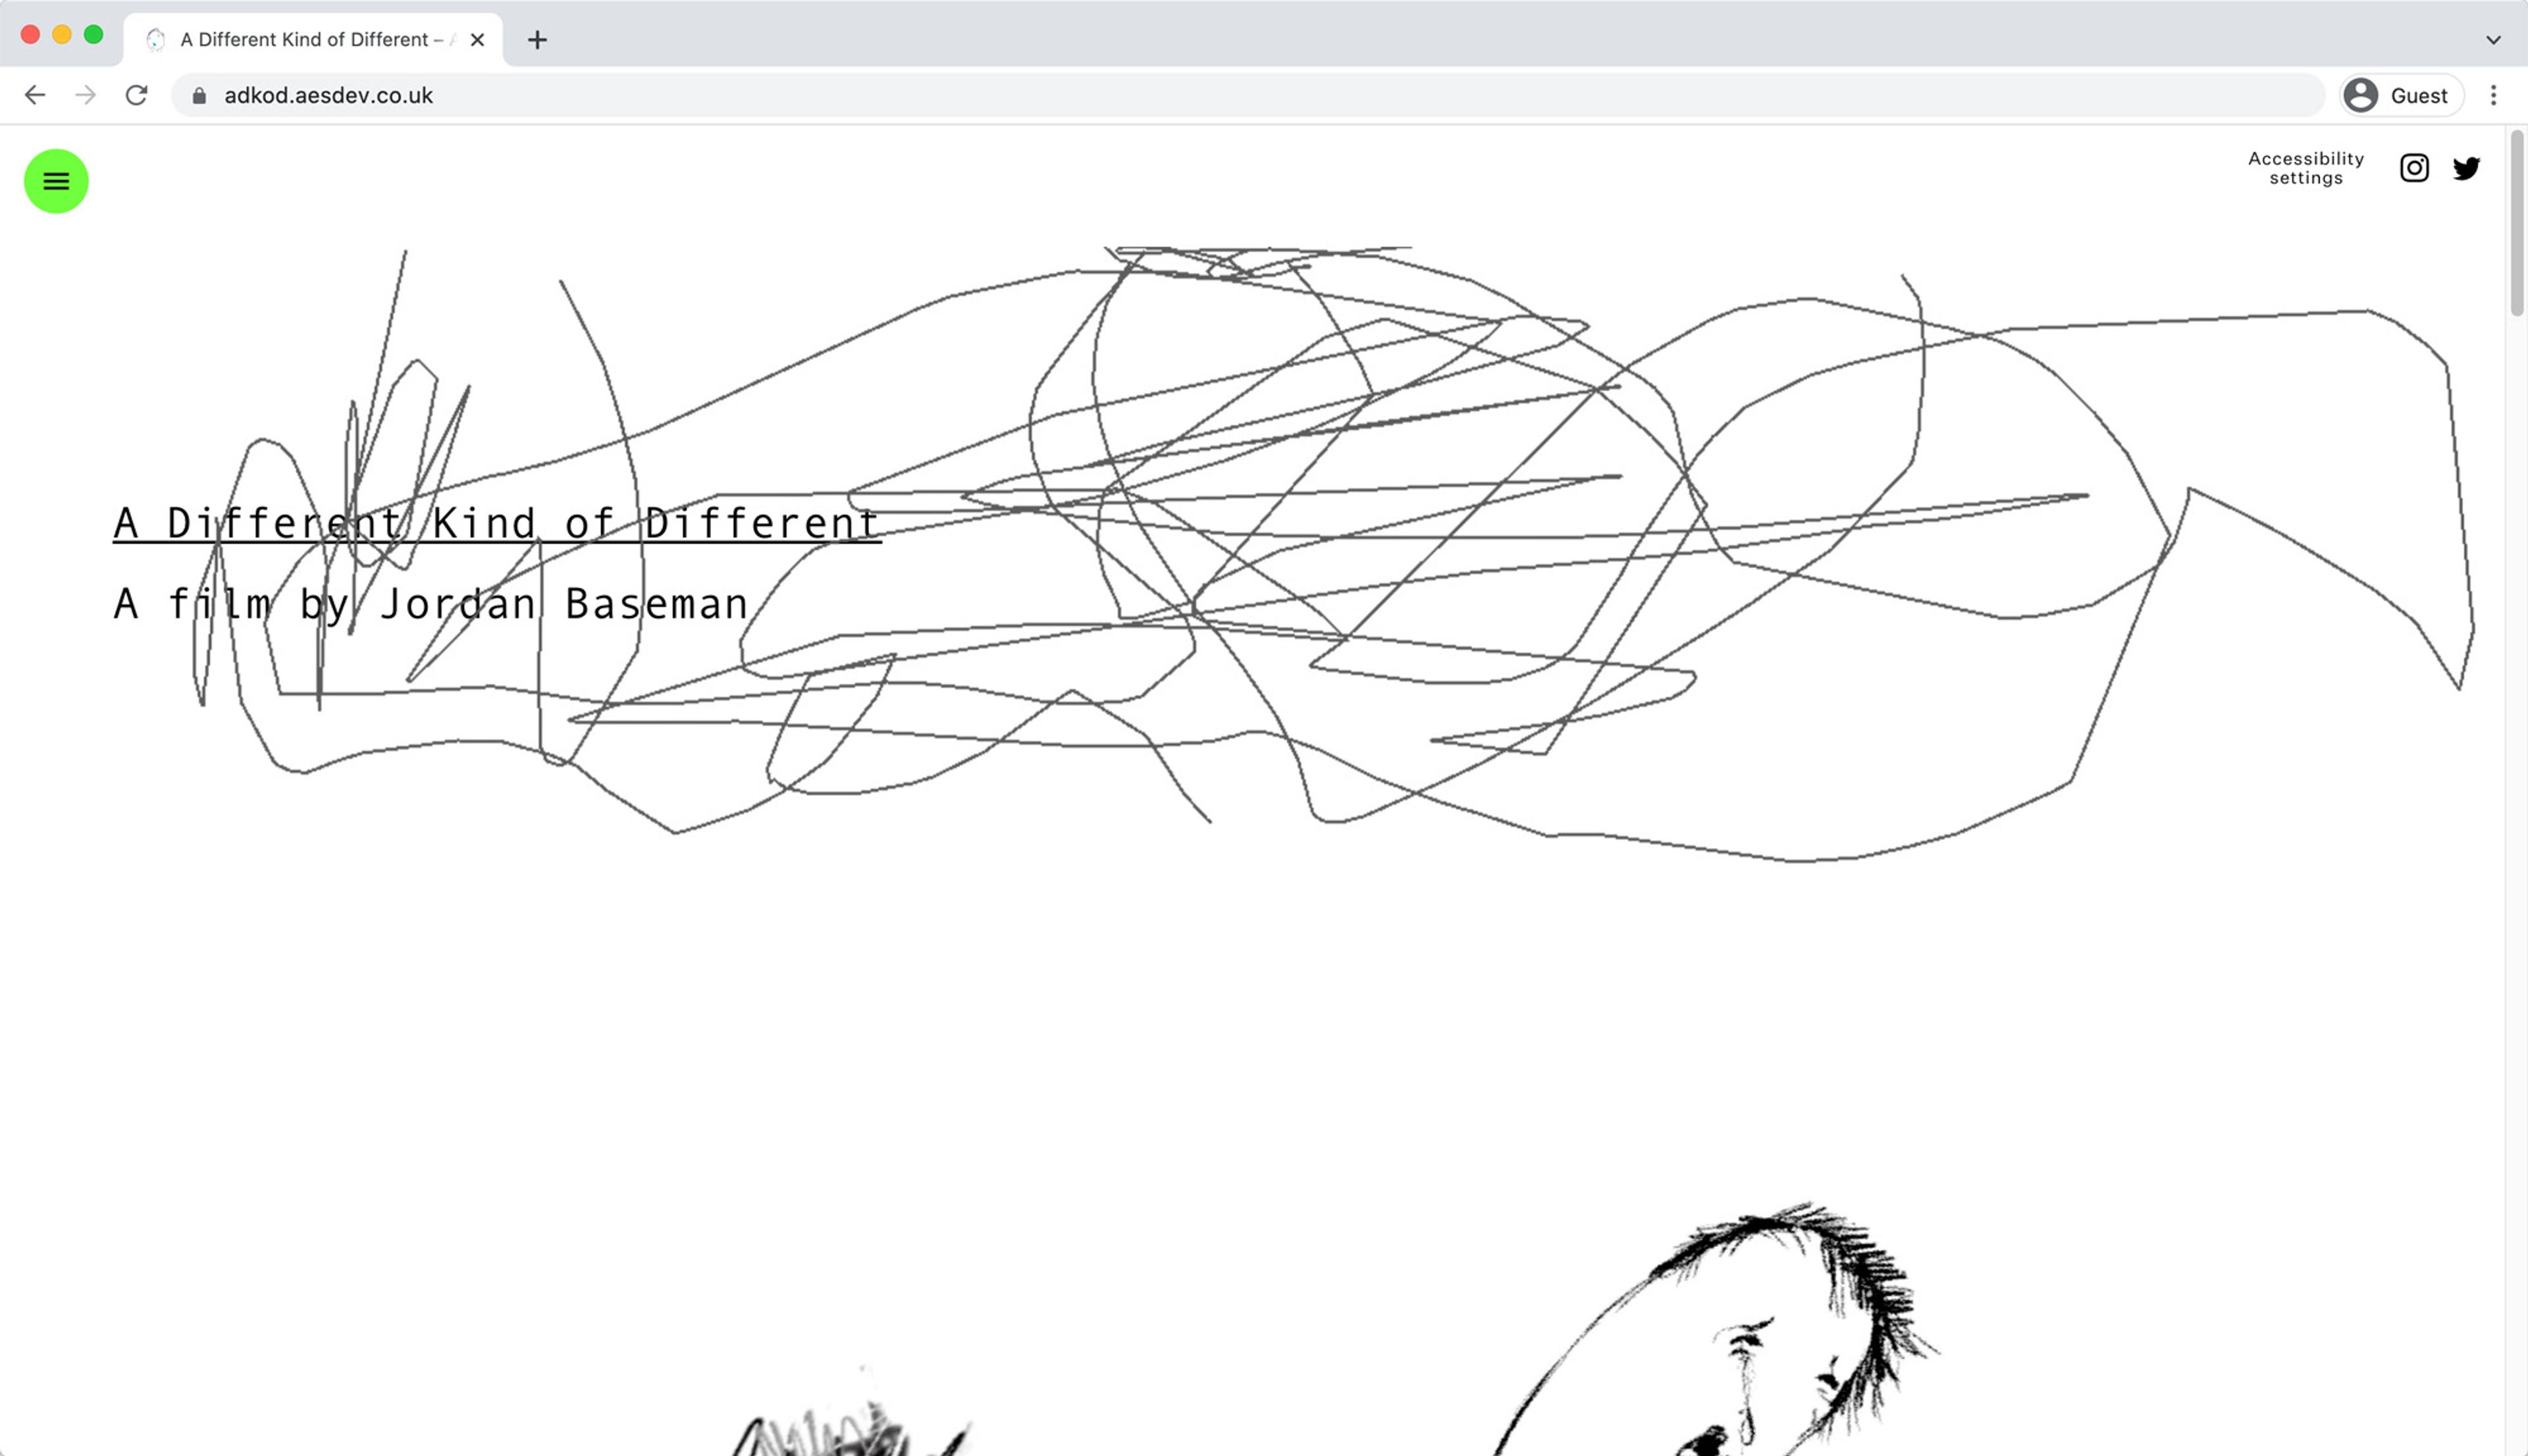 The holding page for A Different Kind of Different included a canvas element where users could scribble with their mouse movements